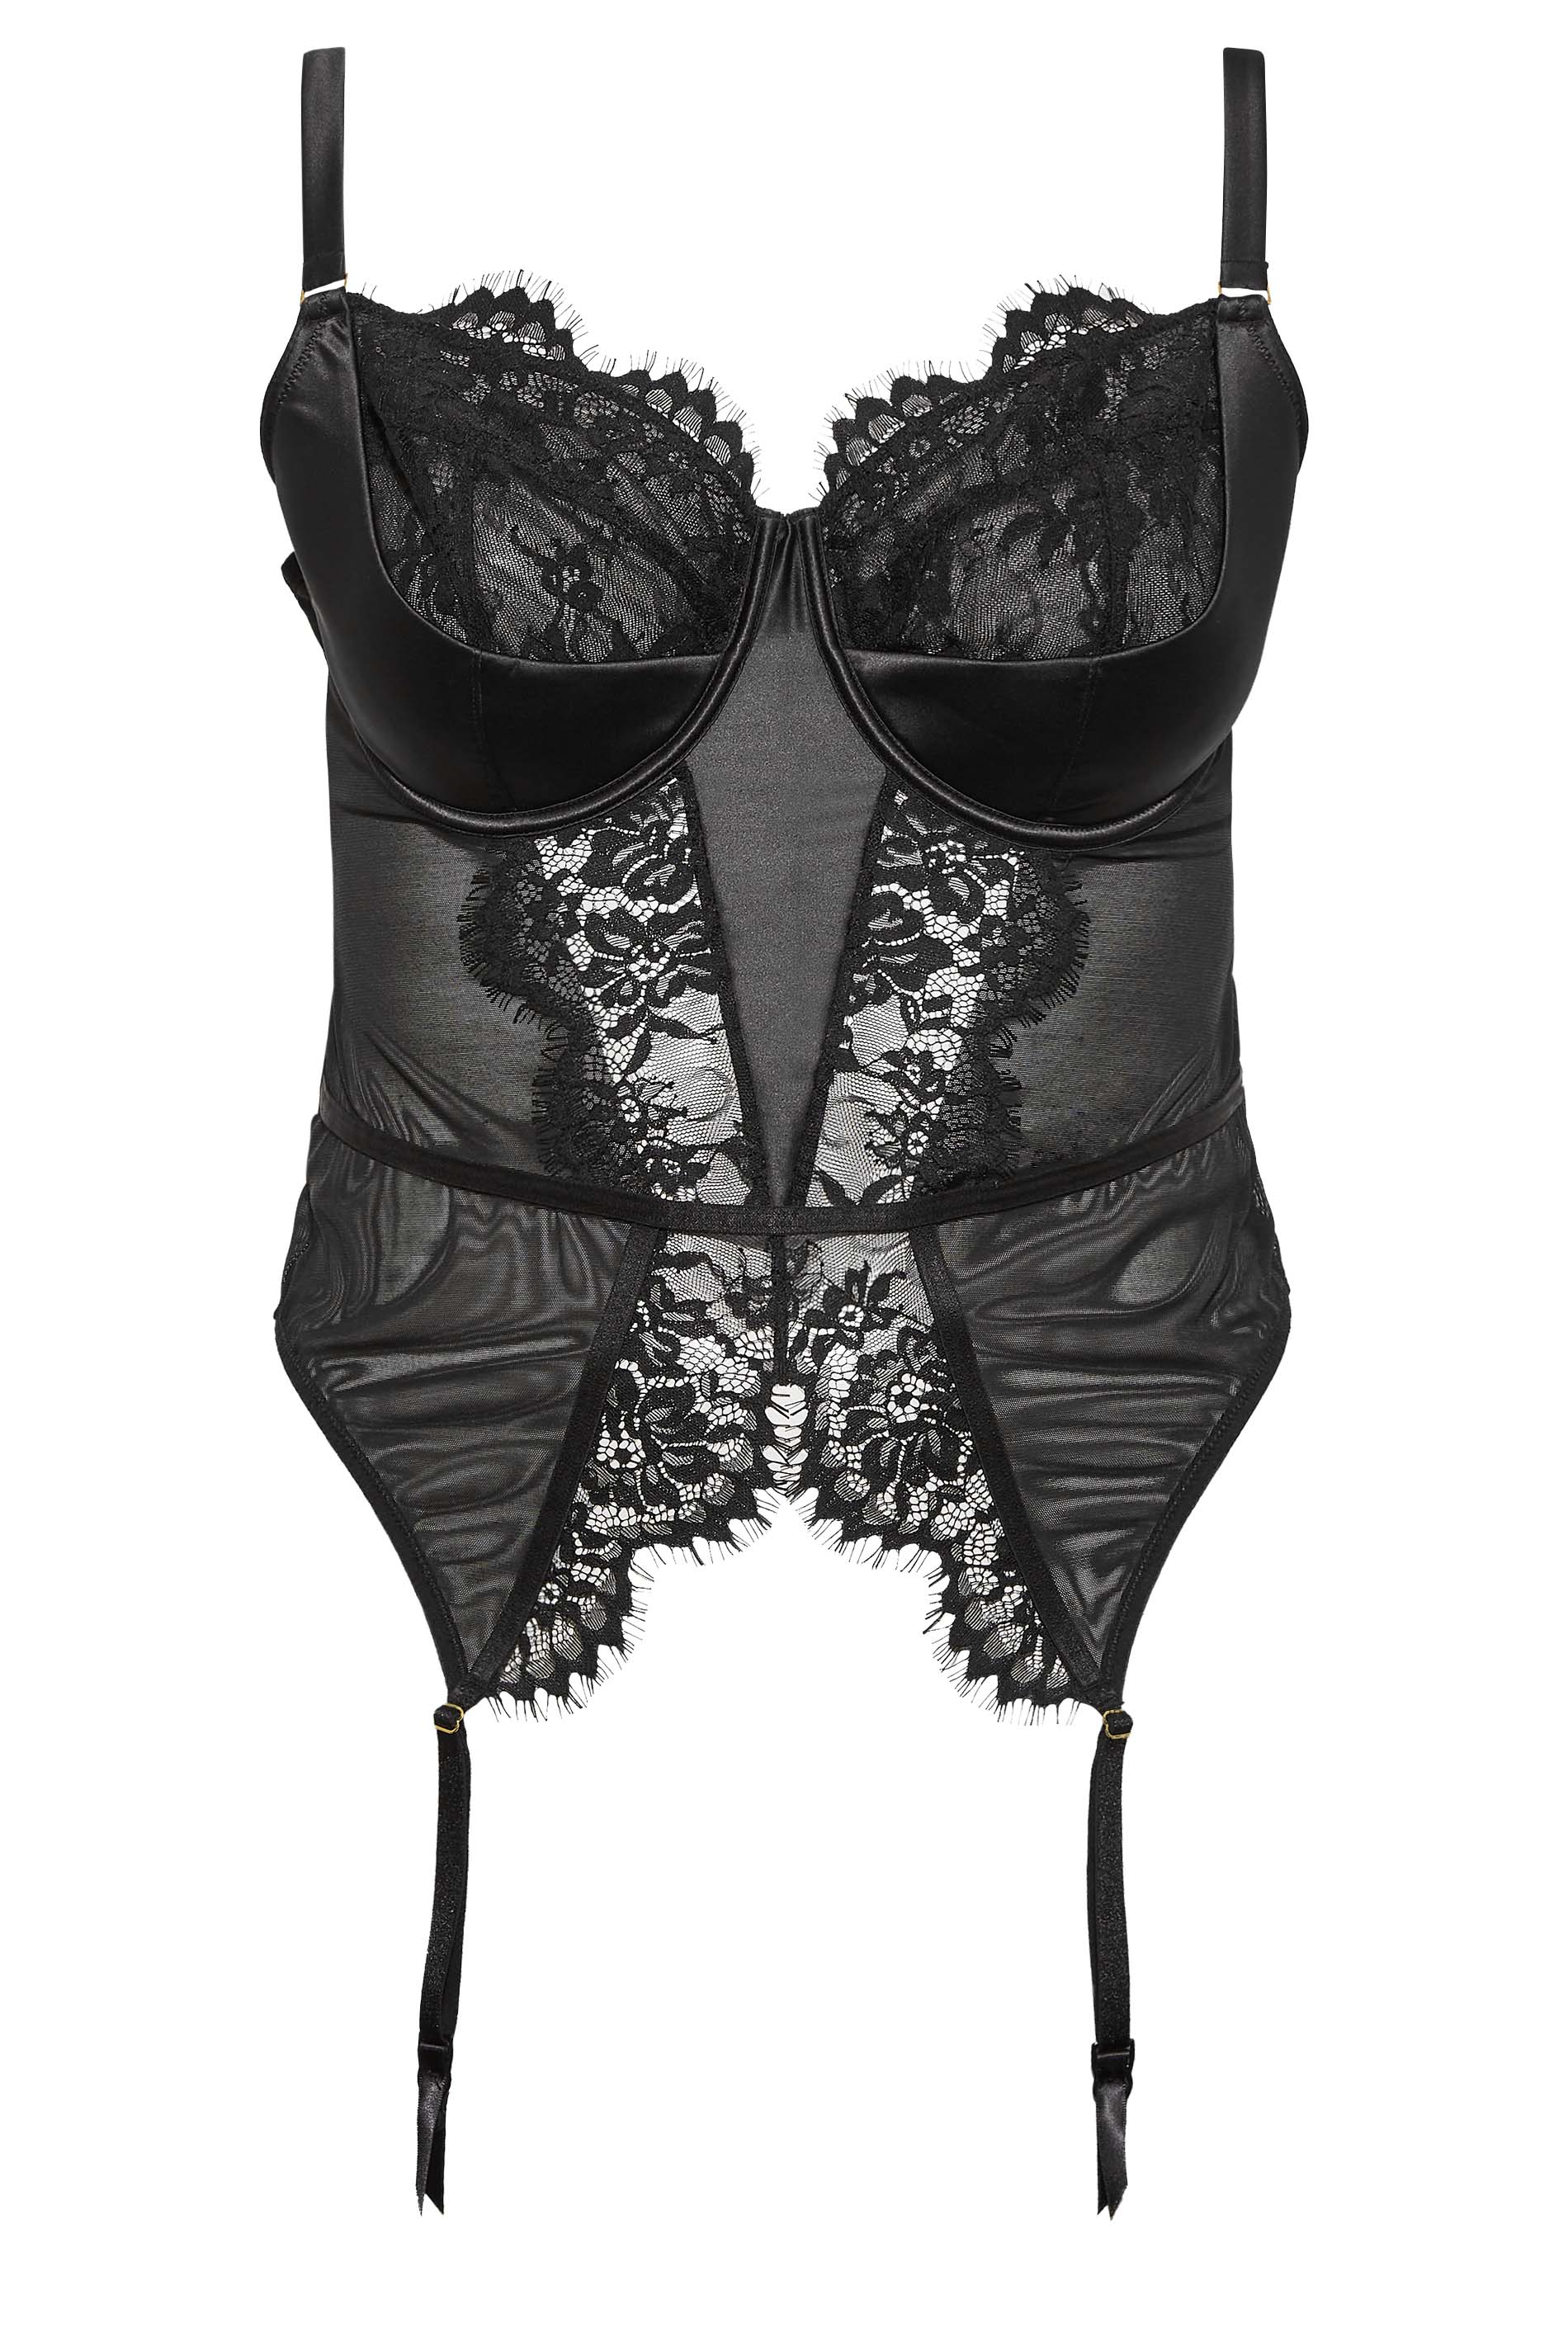 Black Lace Satin Suspender Basque | Yours Clothing